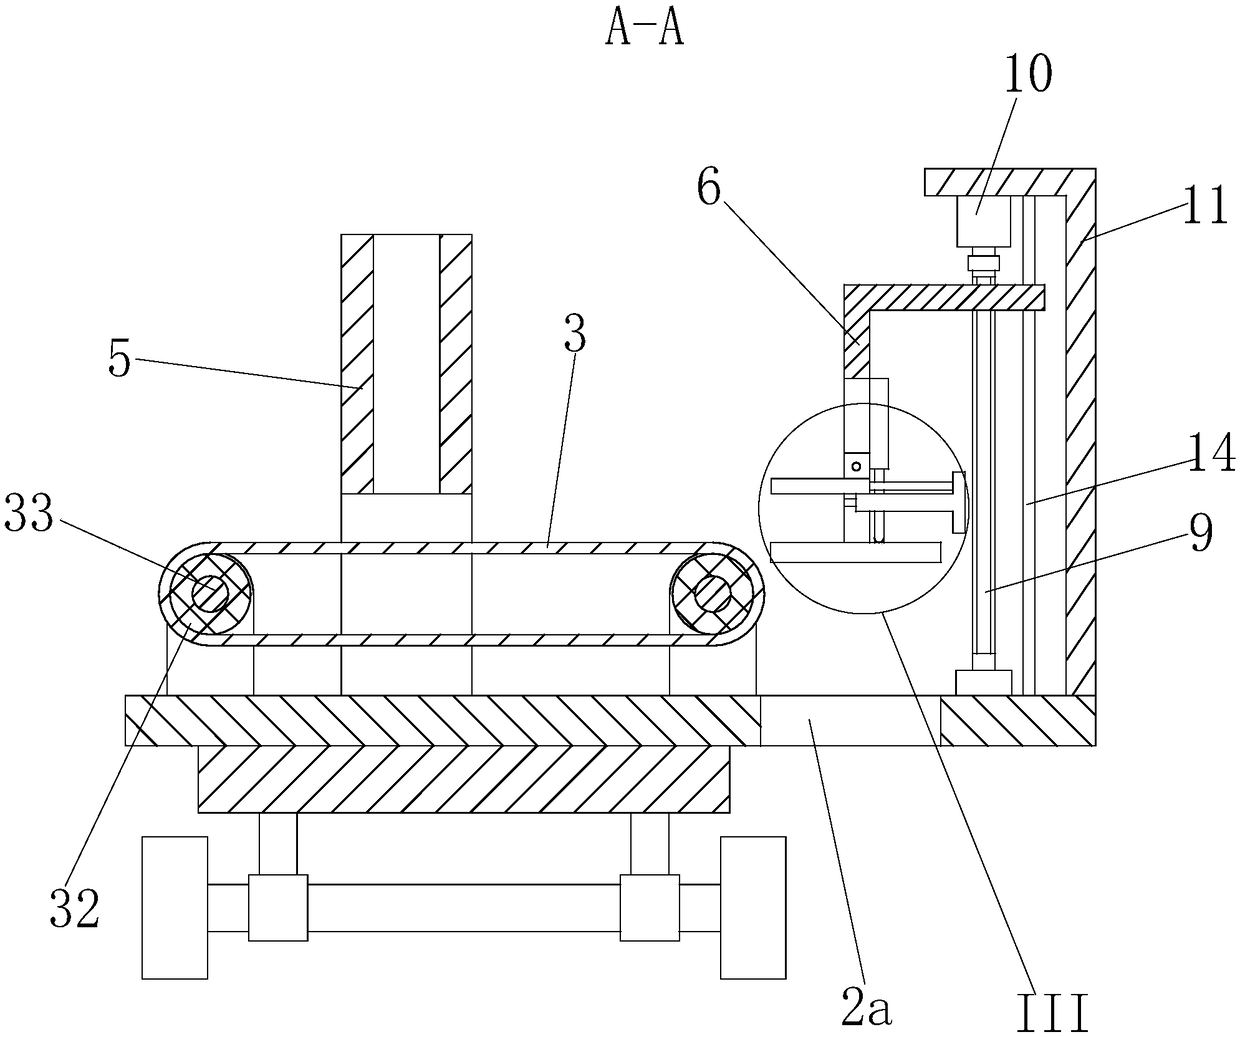 Paving apparatus for kerbstone